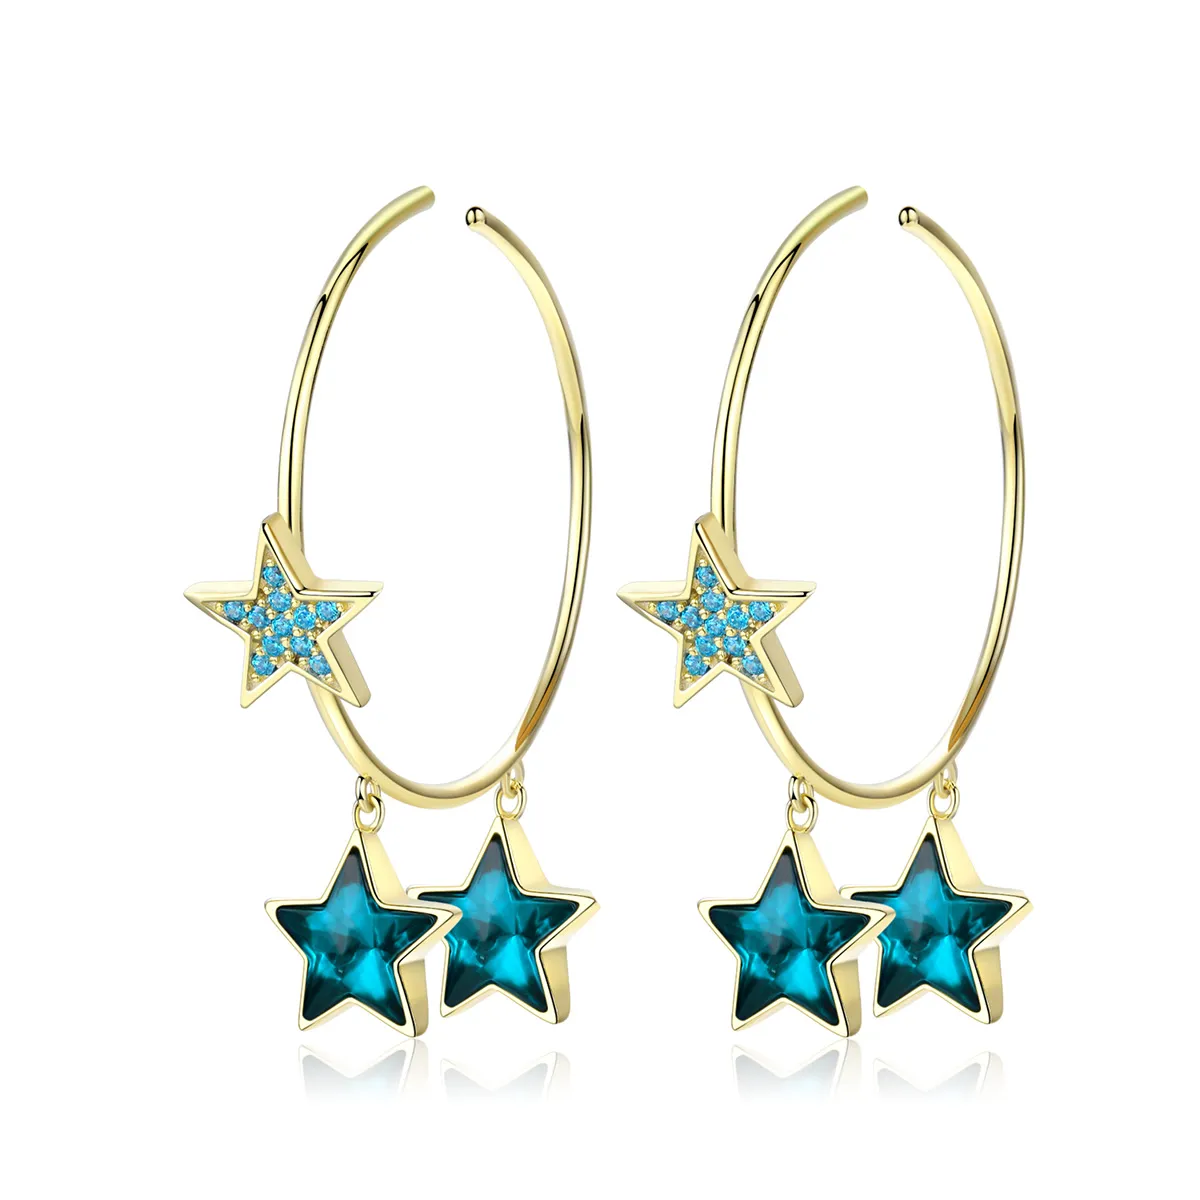 Pandora Style Gold-Plated Mystic Star Hanging Earrings - SCE689